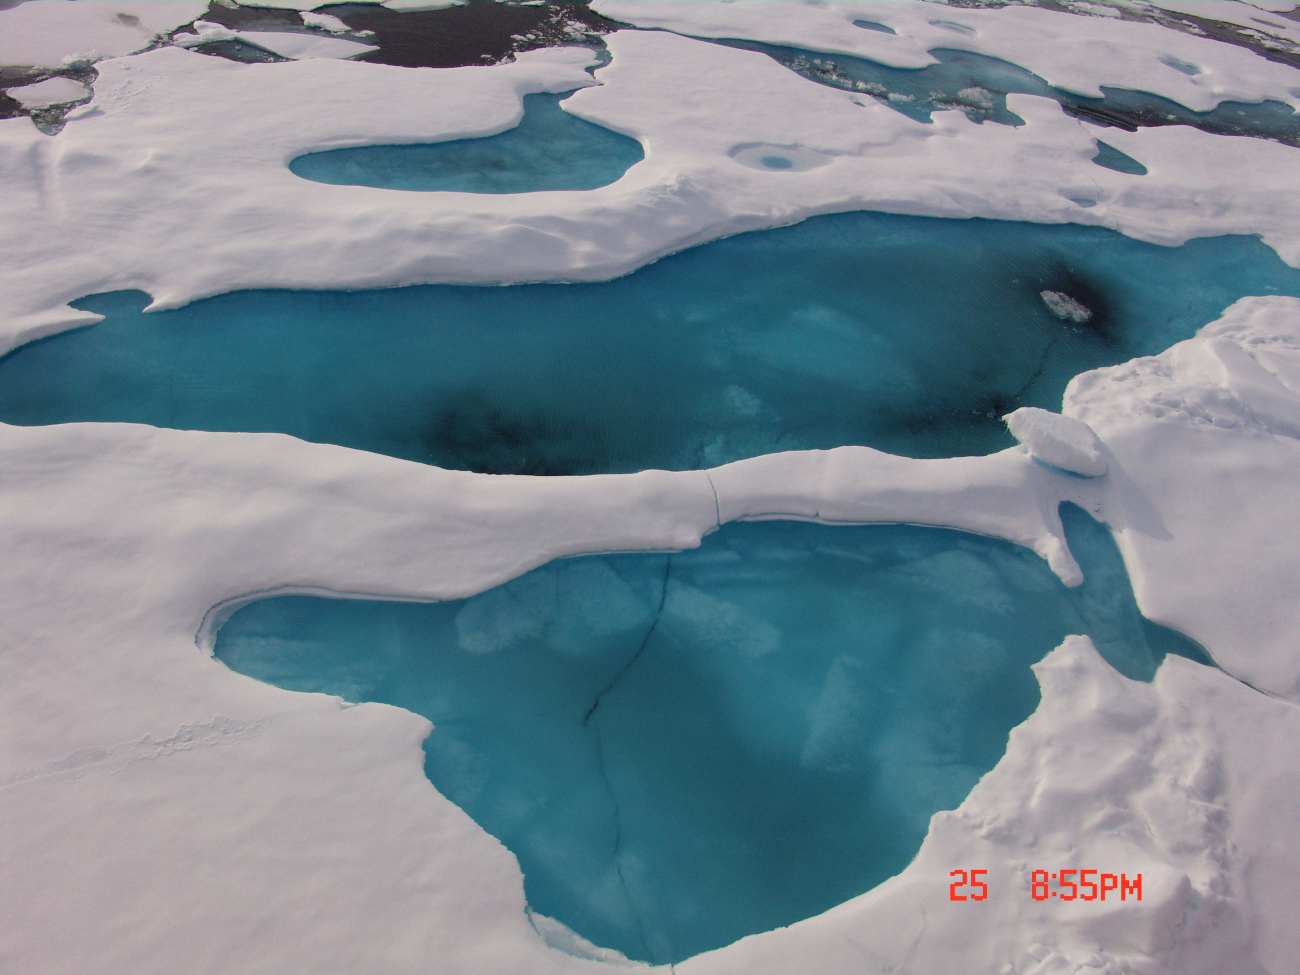 Looking down to aquamarine colored ice with melt ponds melting through tounderlying seawater